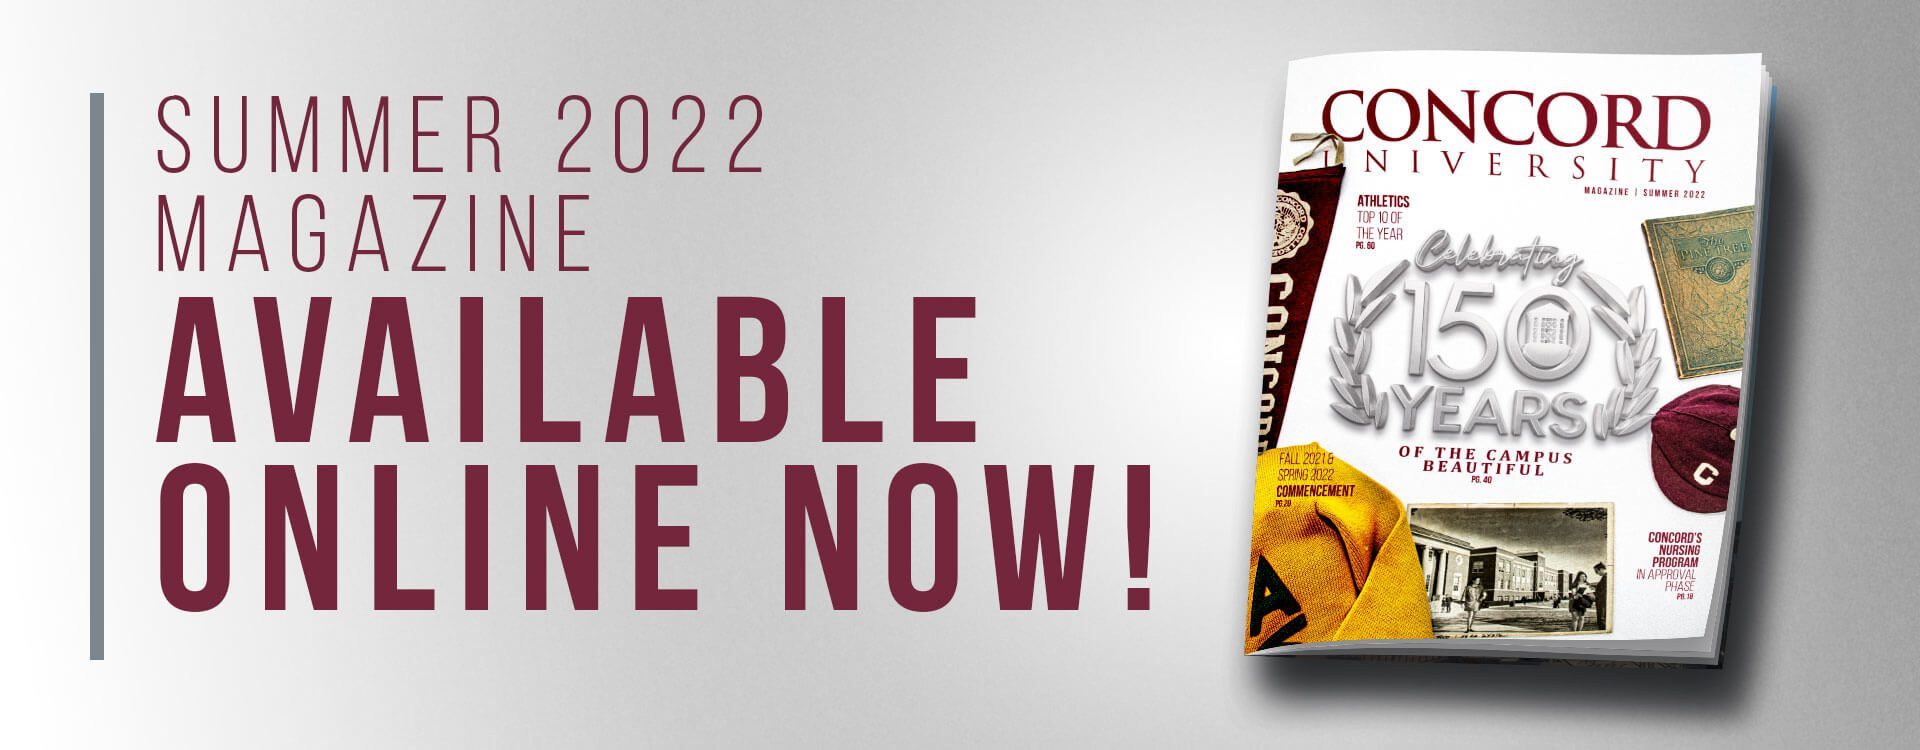 Summer 2022 magazine available online now!